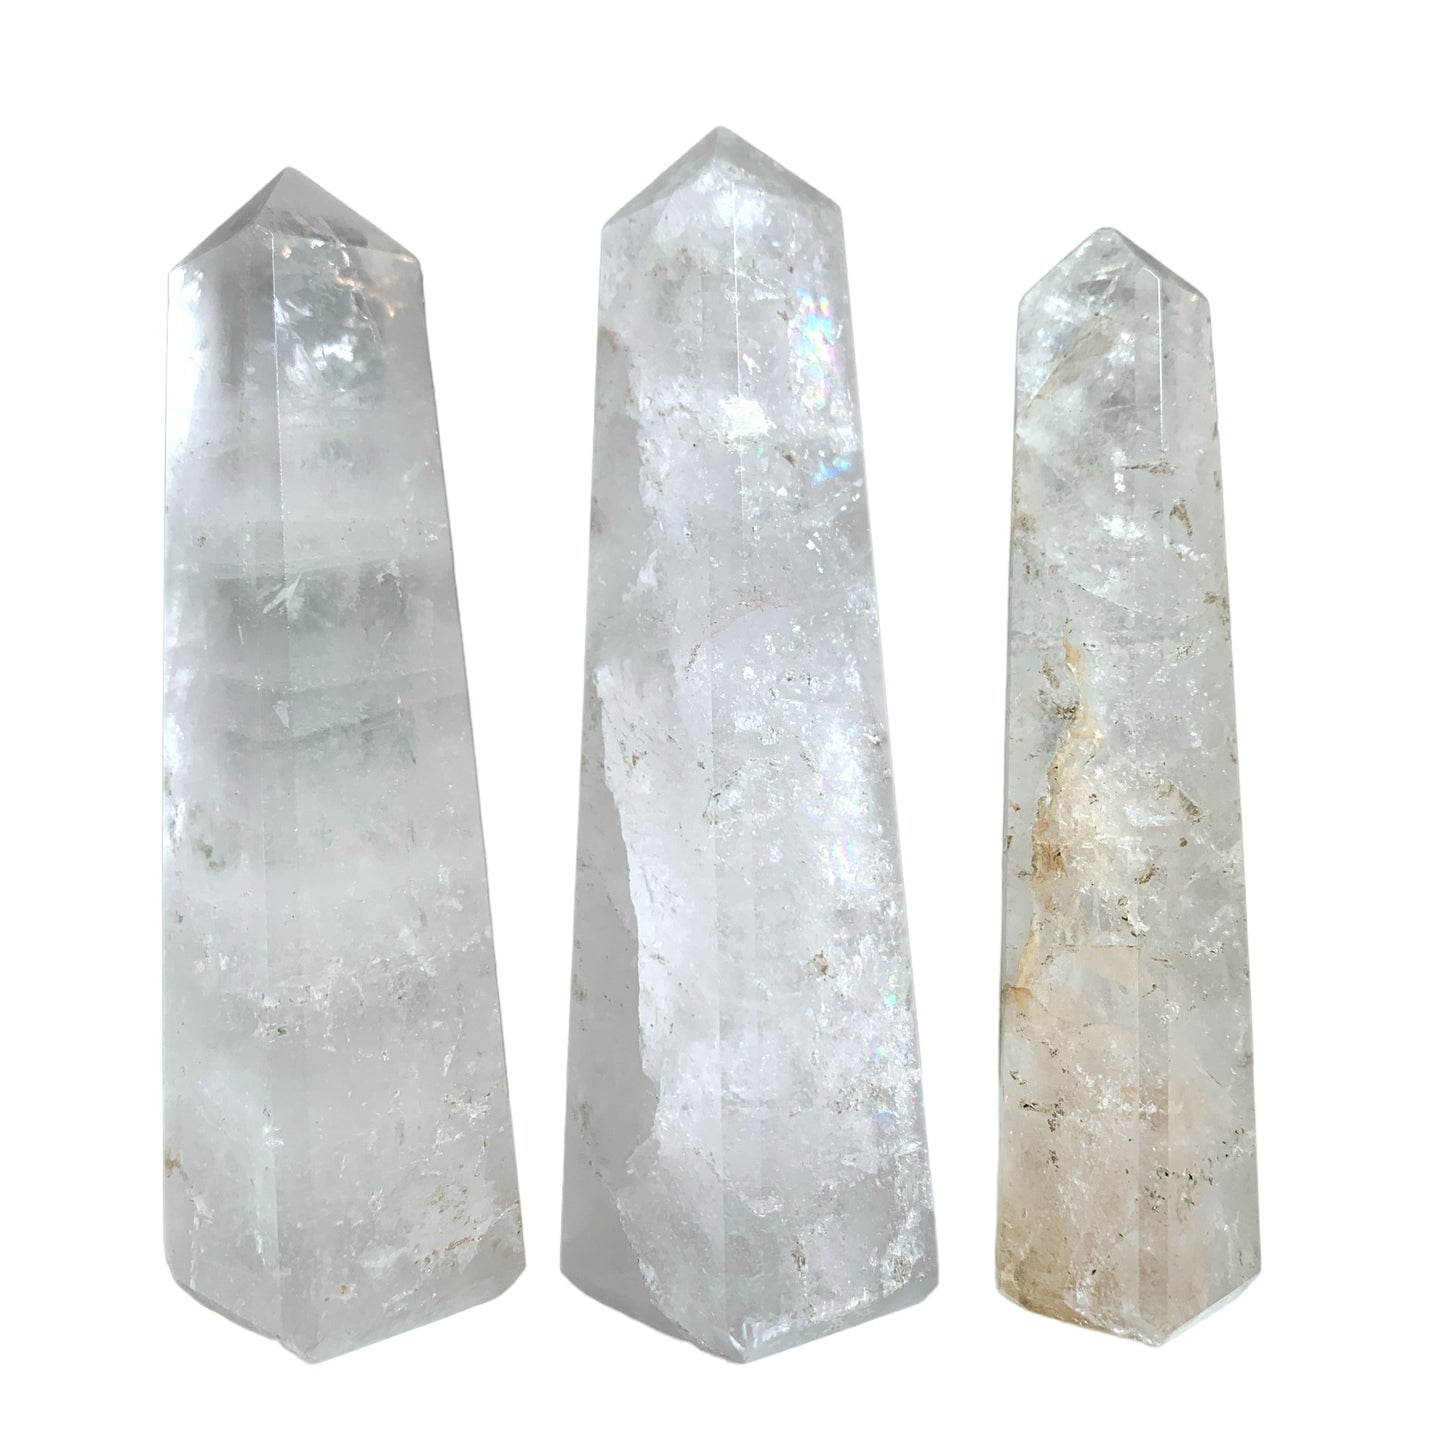 Crystal Quartz - 3 to 5 inches - Price per gram - India - Polished Towers